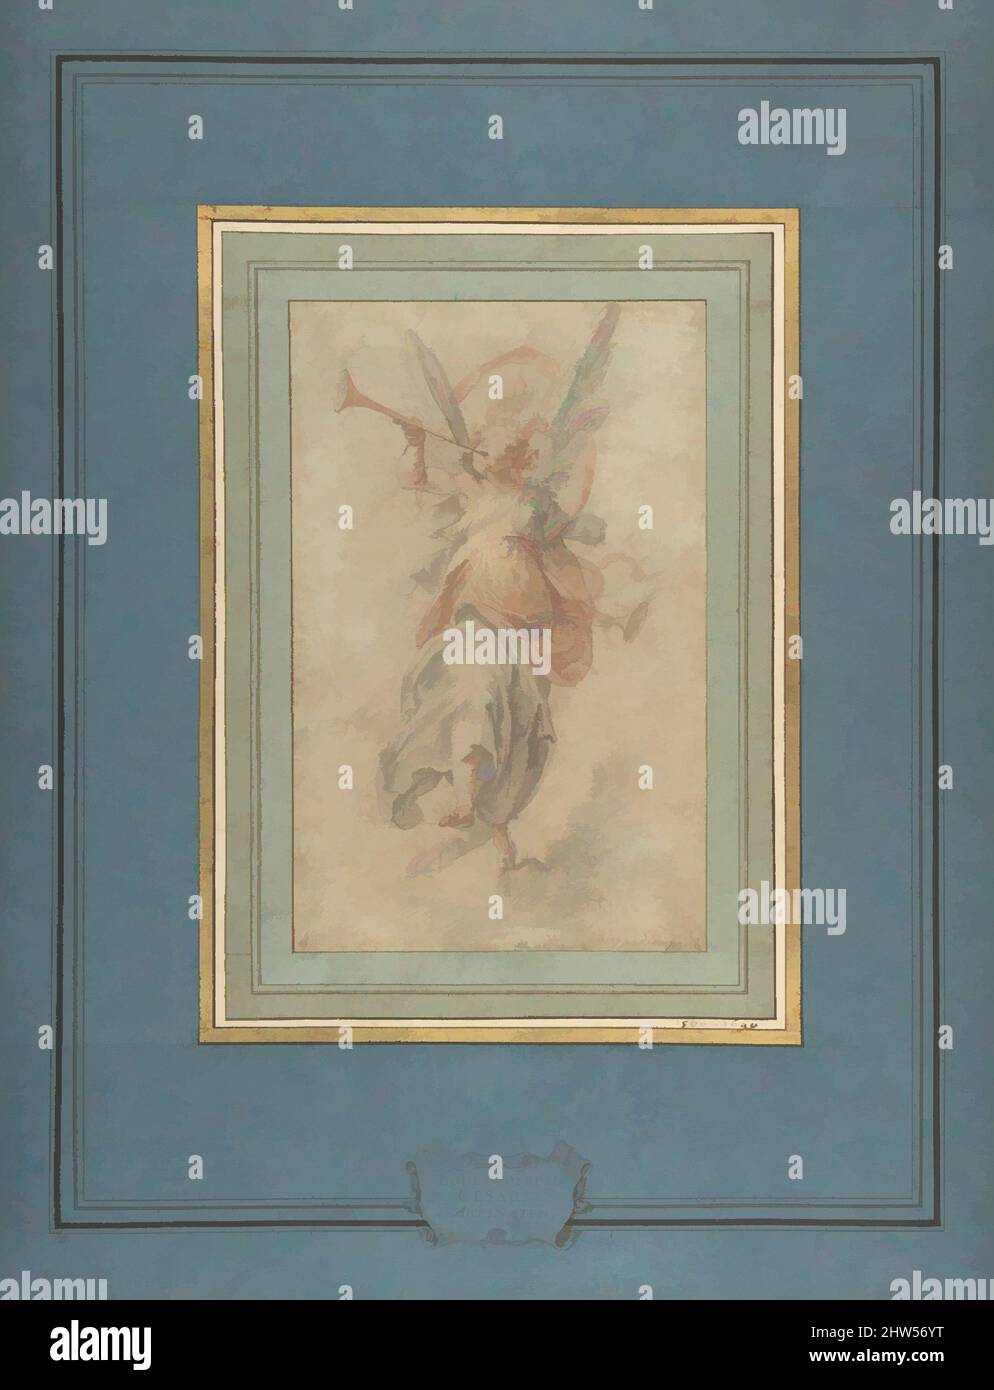 Art inspired by Allegorical Figure of Fame, ca. 1590, Graphite and red chalk, highlighted with white gouache, on light brown paper, 9 13/16 x 6 1/4in. (25 x 15.9cm), Drawings, Cavaliere d'Arpino (Giuseppe Cesari) (Italian, Arpino 1568–1640 Rome), The attribution of this celebrated, Classic works modernized by Artotop with a splash of modernity. Shapes, color and value, eye-catching visual impact on art. Emotions through freedom of artworks in a contemporary way. A timeless message pursuing a wildly creative new direction. Artists turning to the digital medium and creating the Artotop NFT Stock Photo